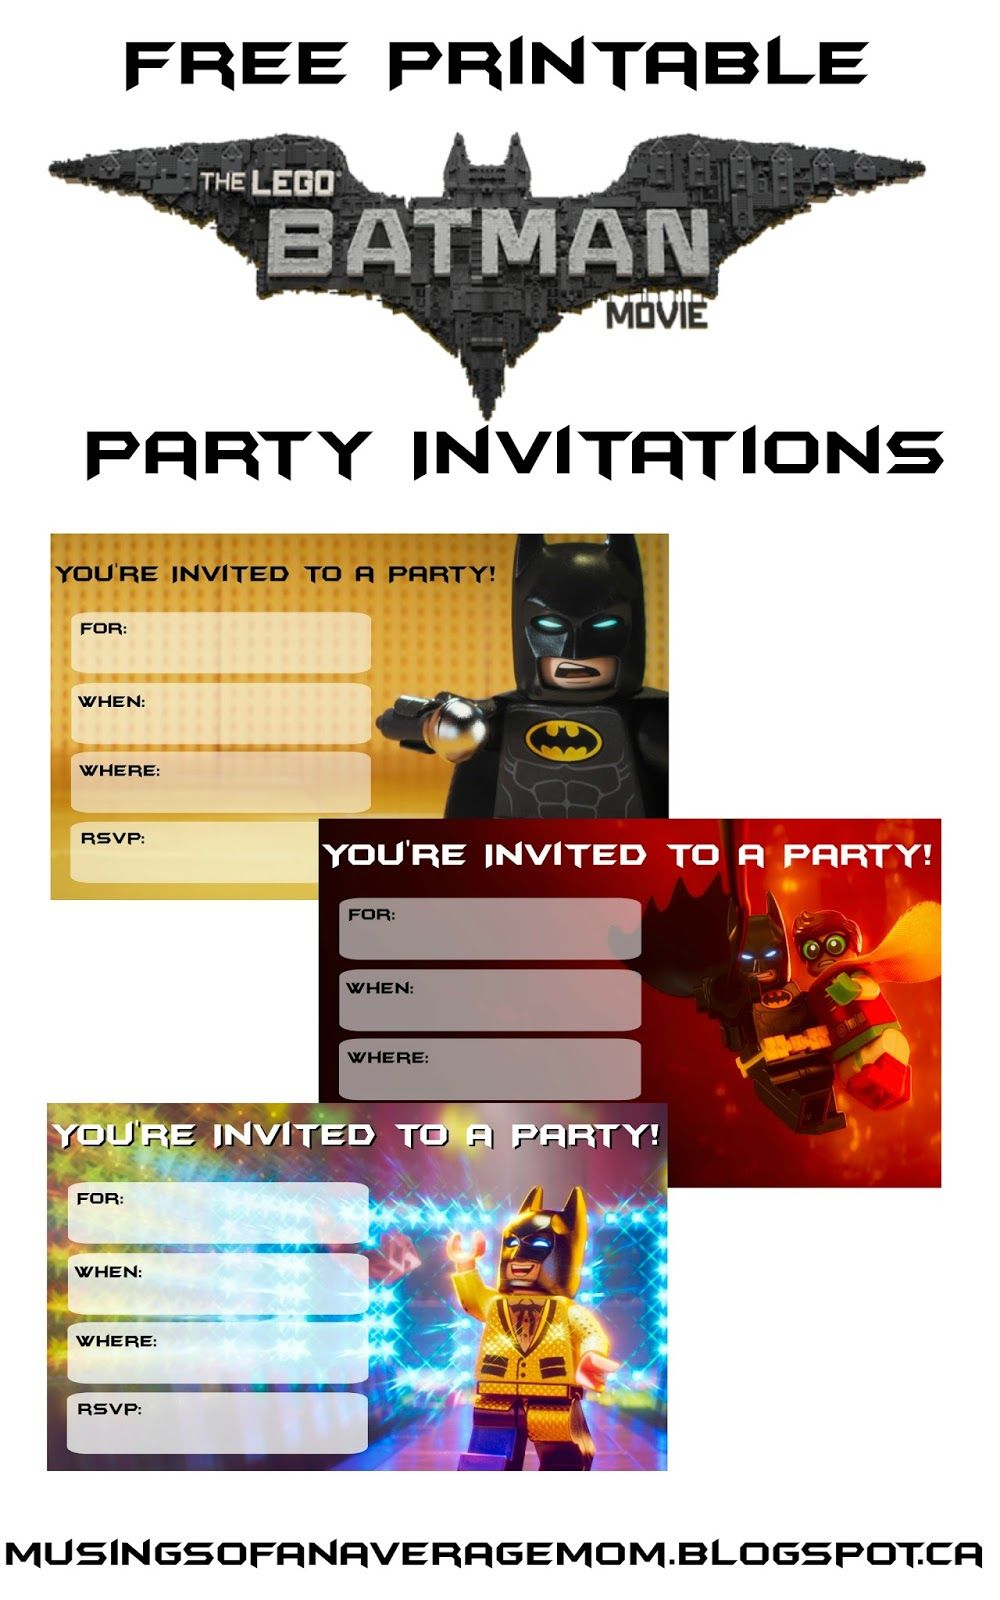 Everything You Need For A Lego Batman Party | Party Ideas | Lego - Lego Batman Party Invitations Free Printable